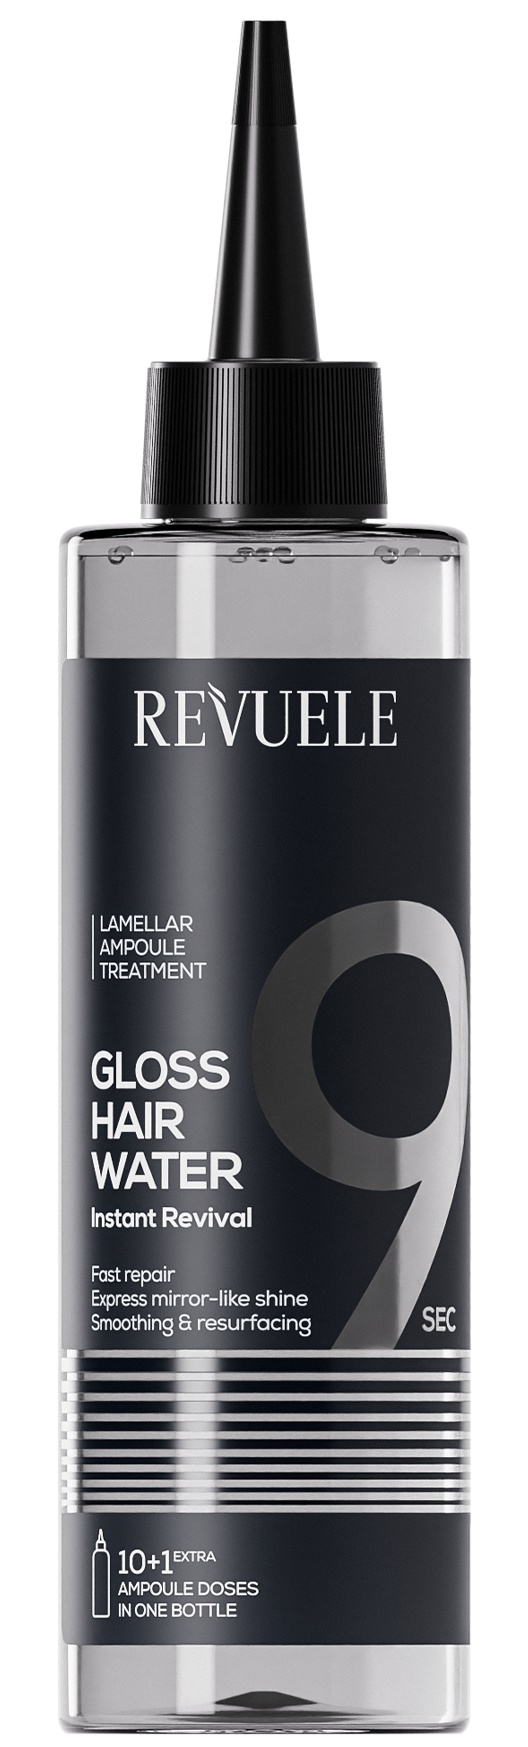 Revuele Gloss Hair Water Instant Revival